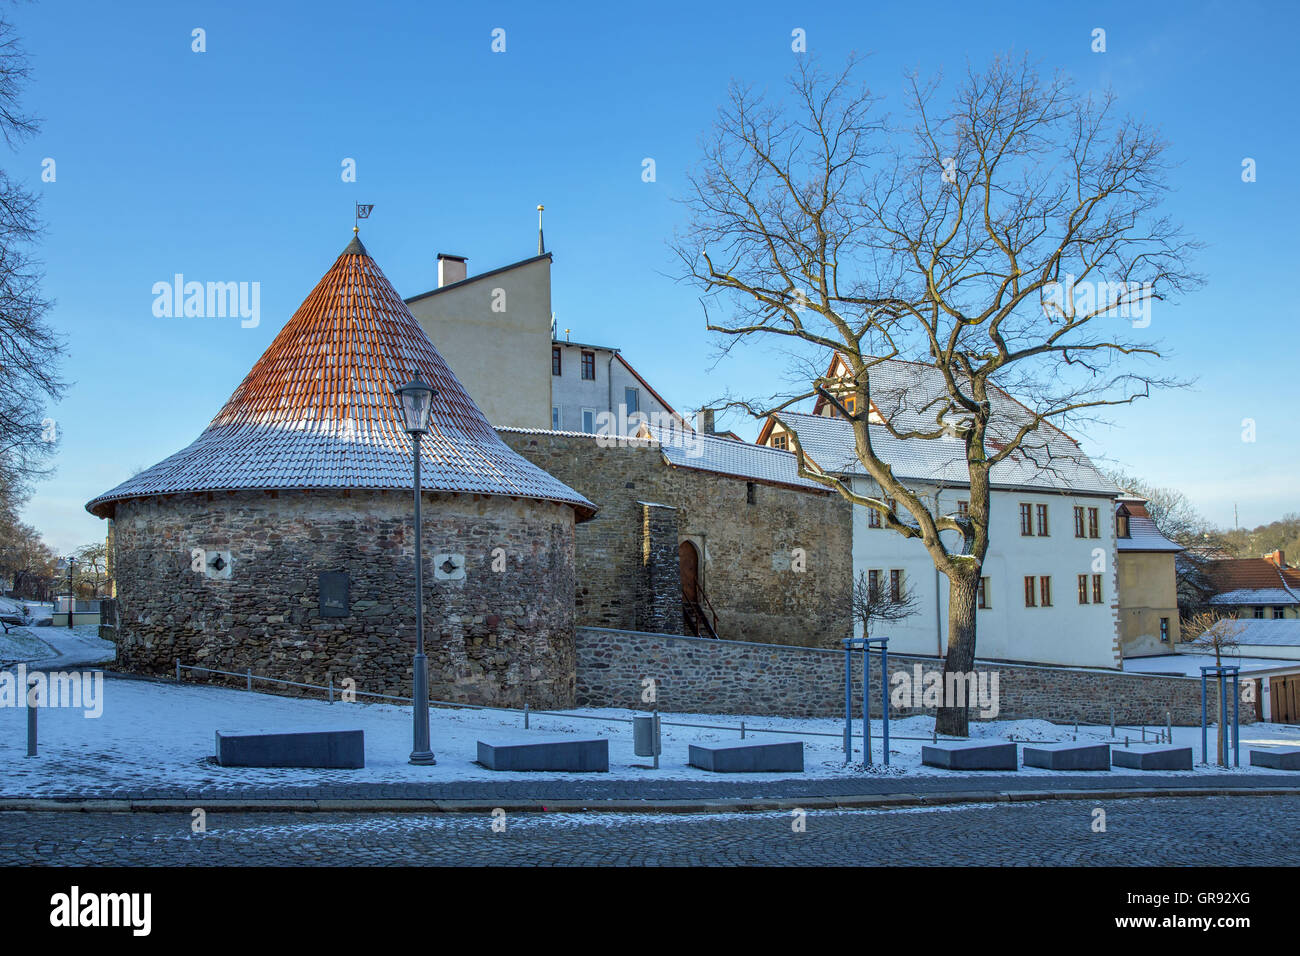 Powder Tower And Luthereiche In Pößneck In Winter, Thuringia, Germany, Europe Stock Photo